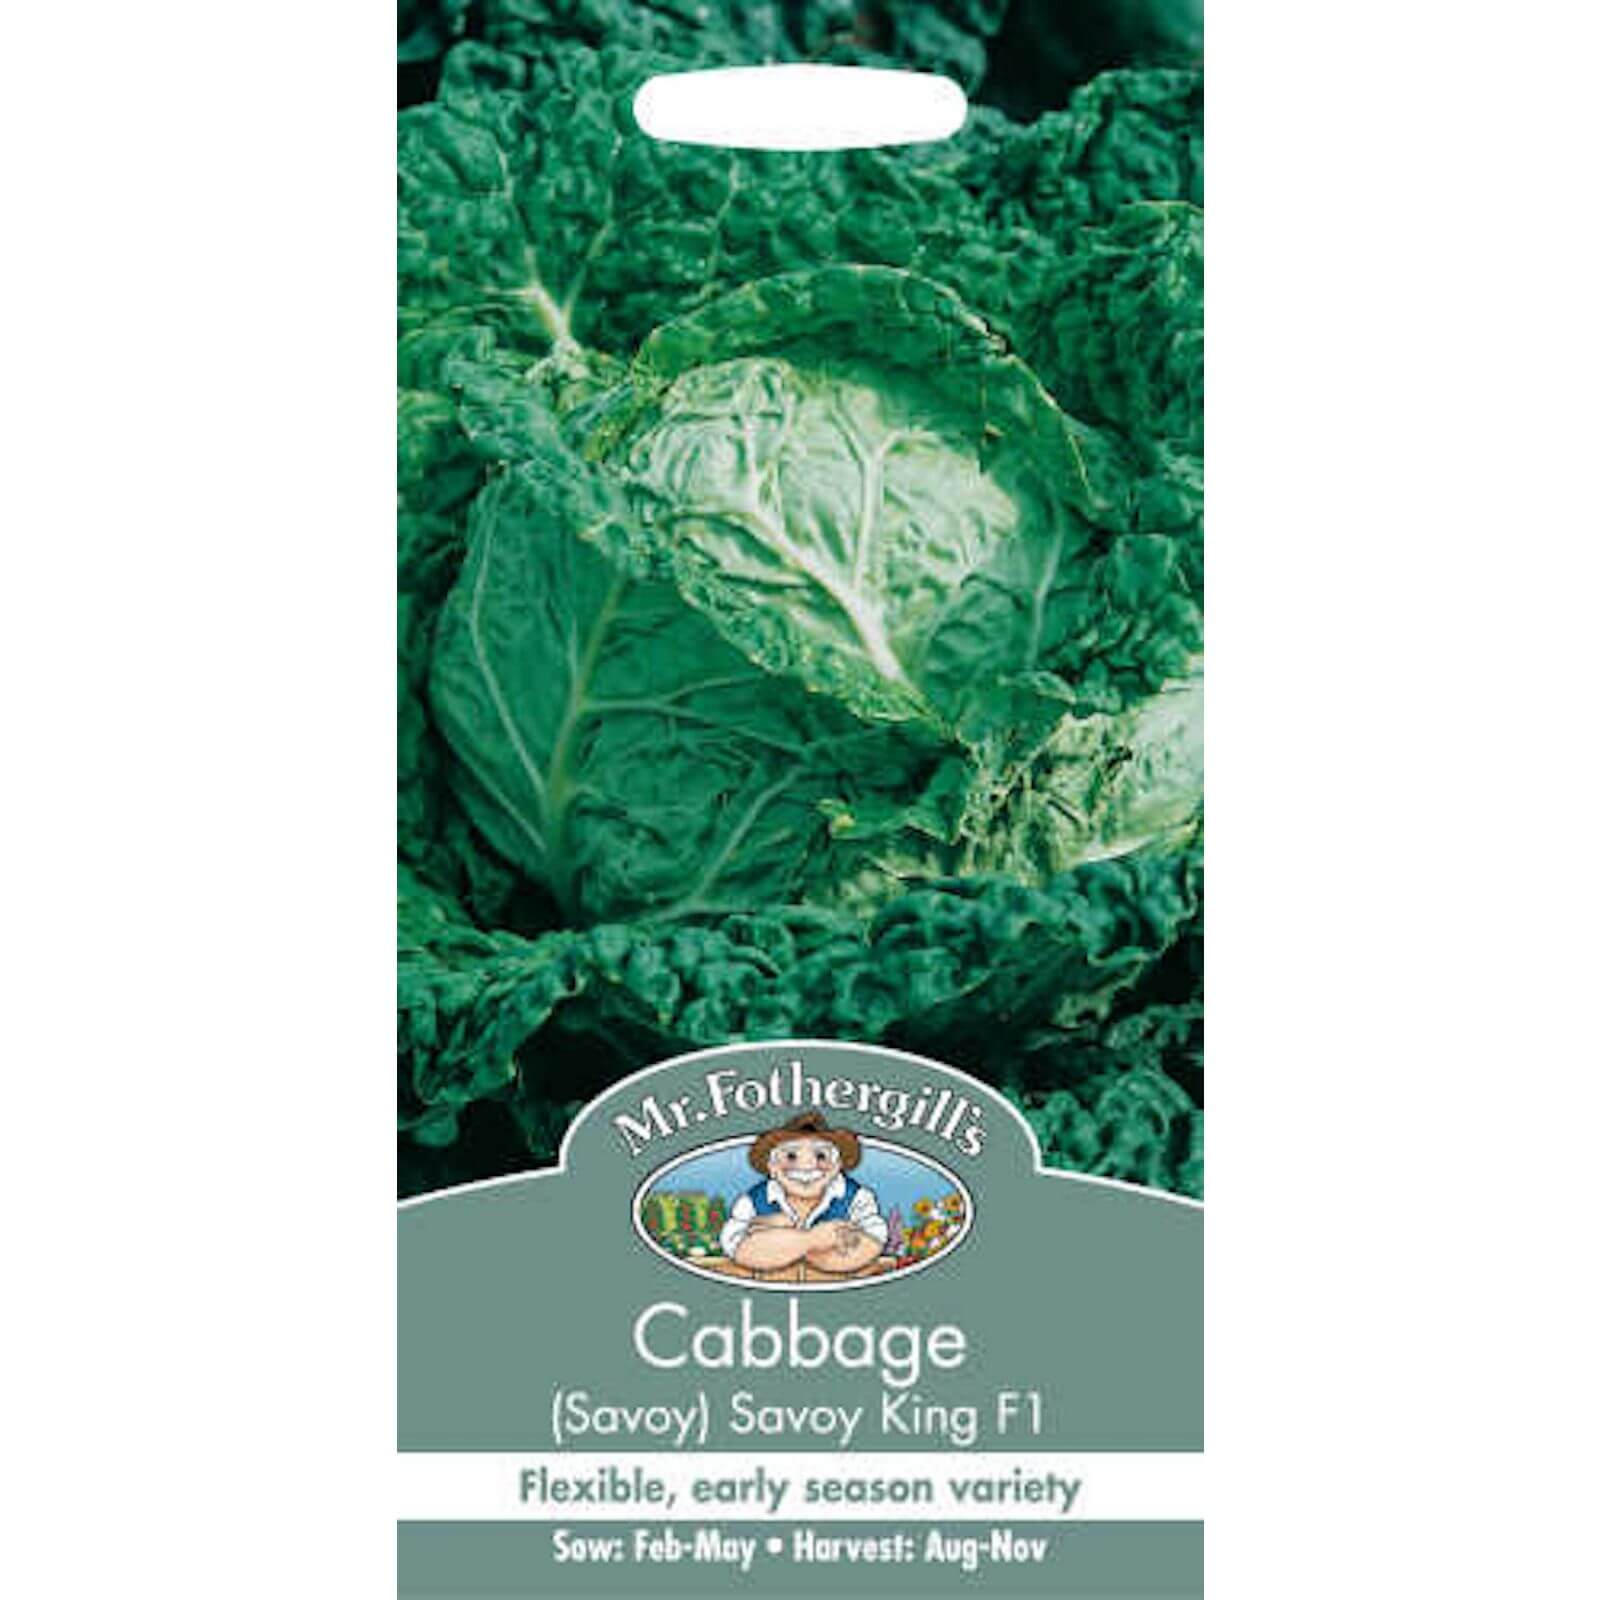 Mr. Fothergill's Cabbage Savoy  King F1 Seeds